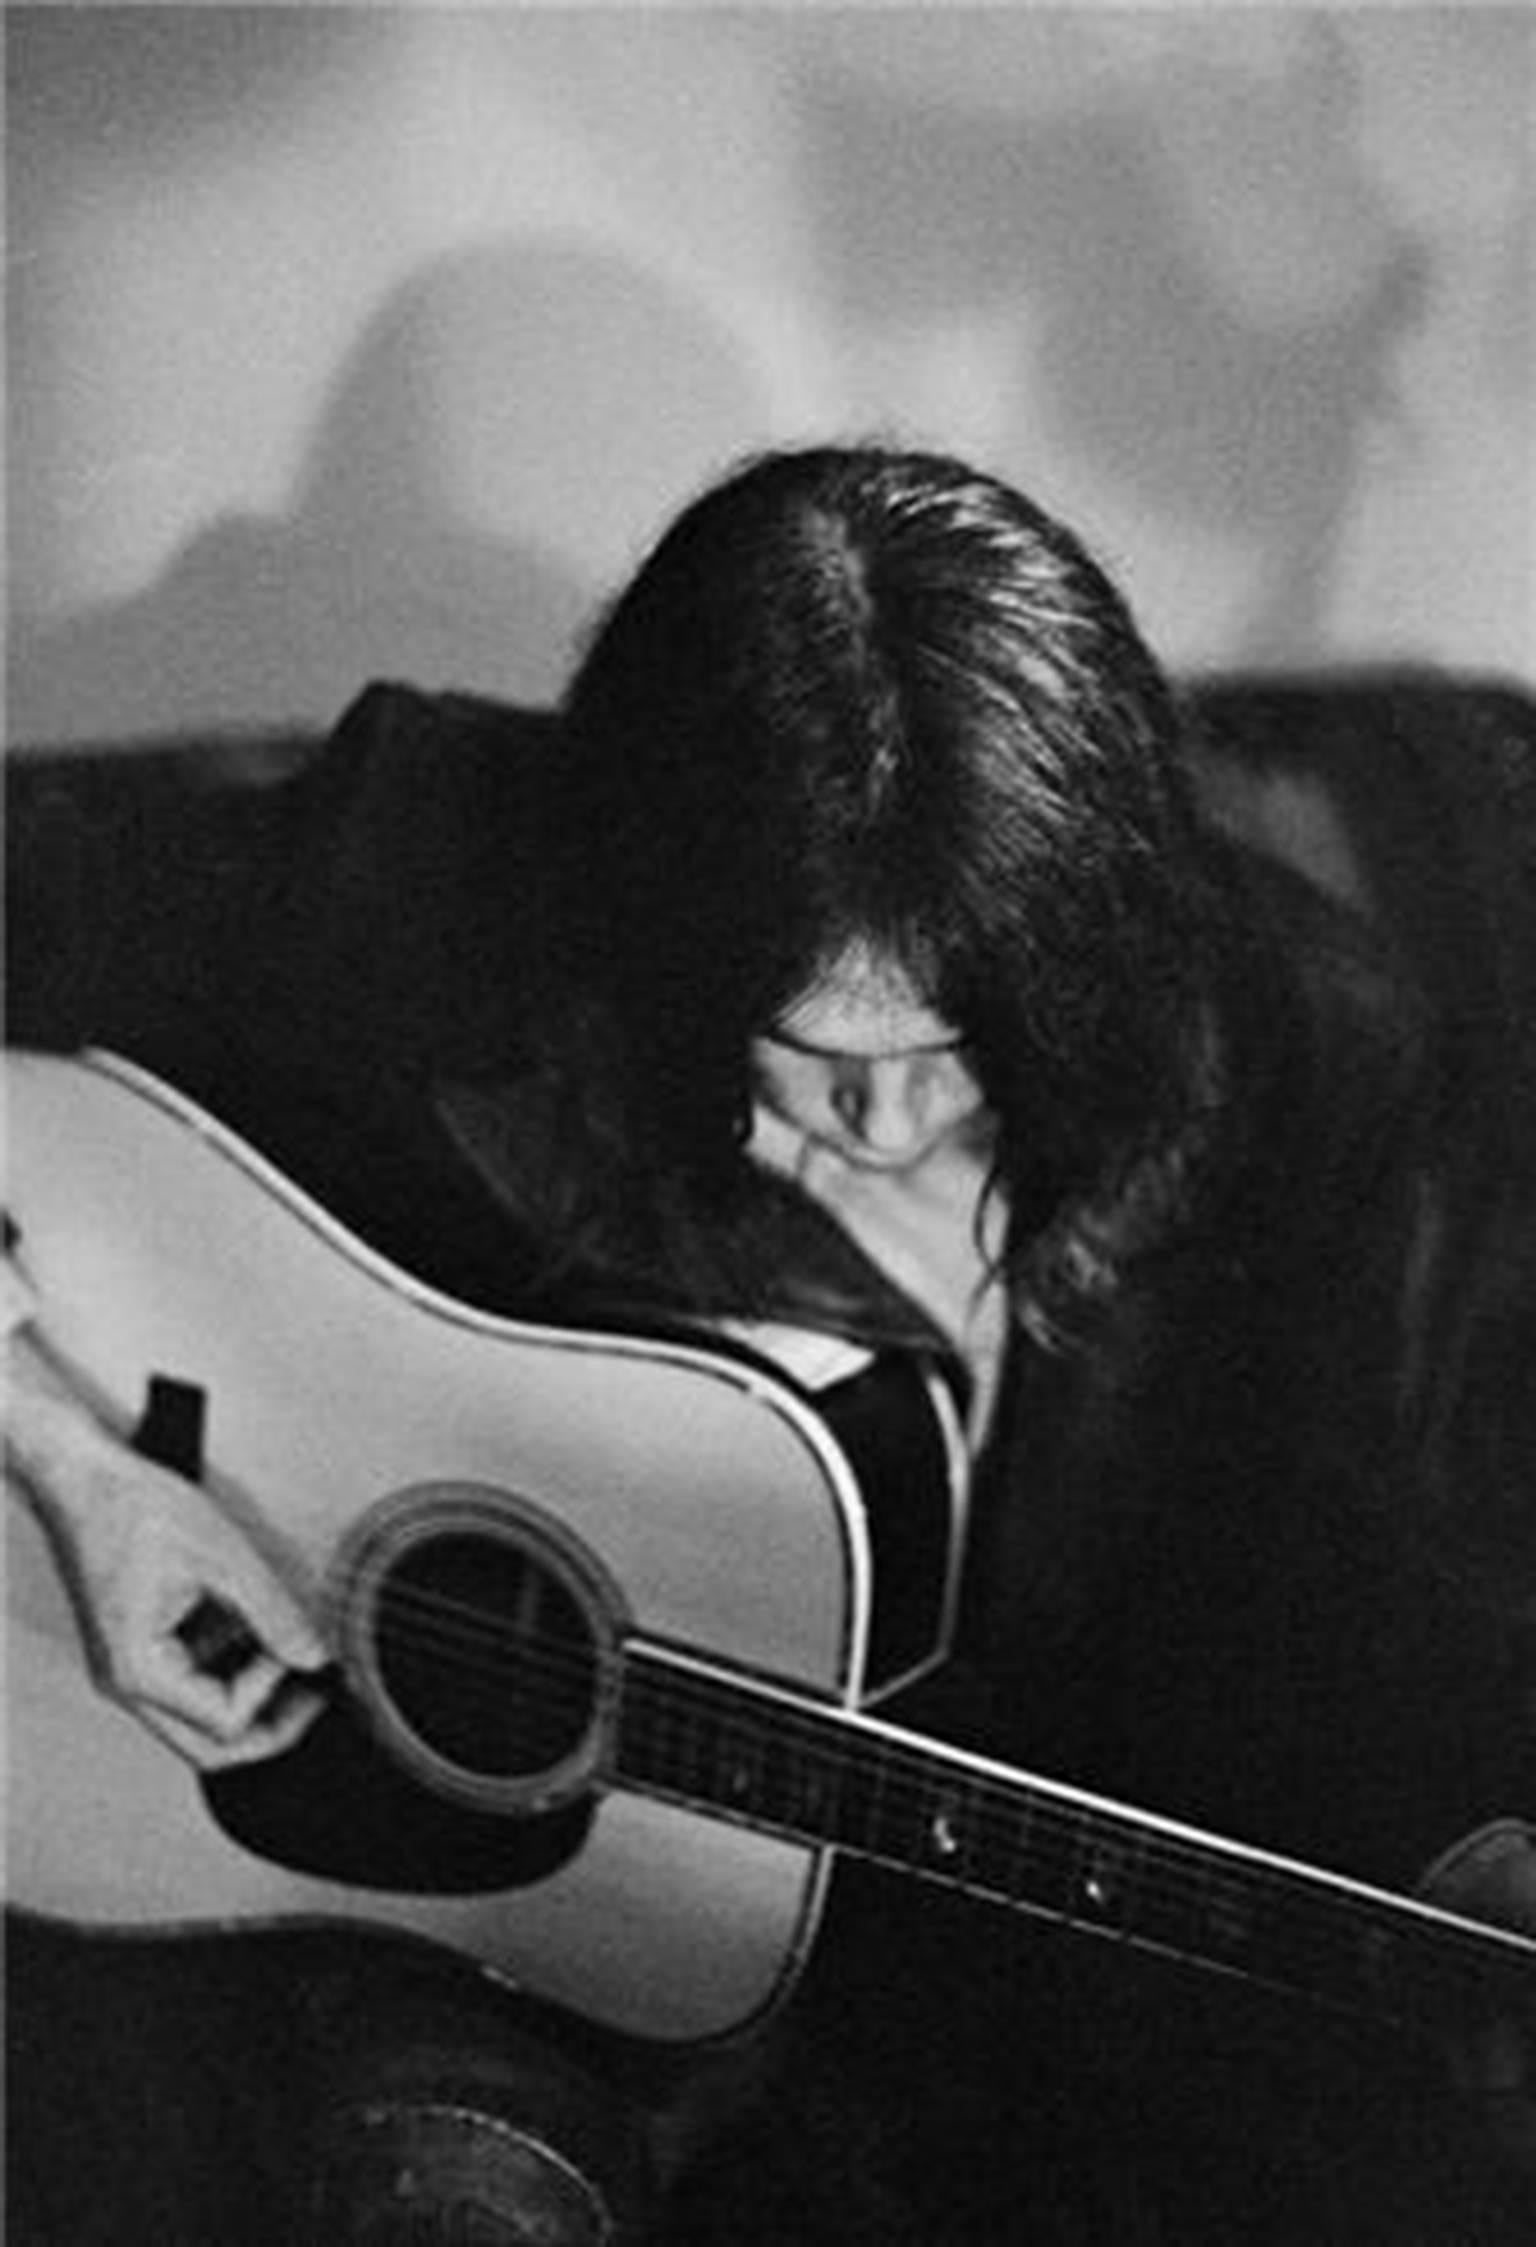 Joel Bernstein Black and White Photograph - Neil Young, New York, NY 1970